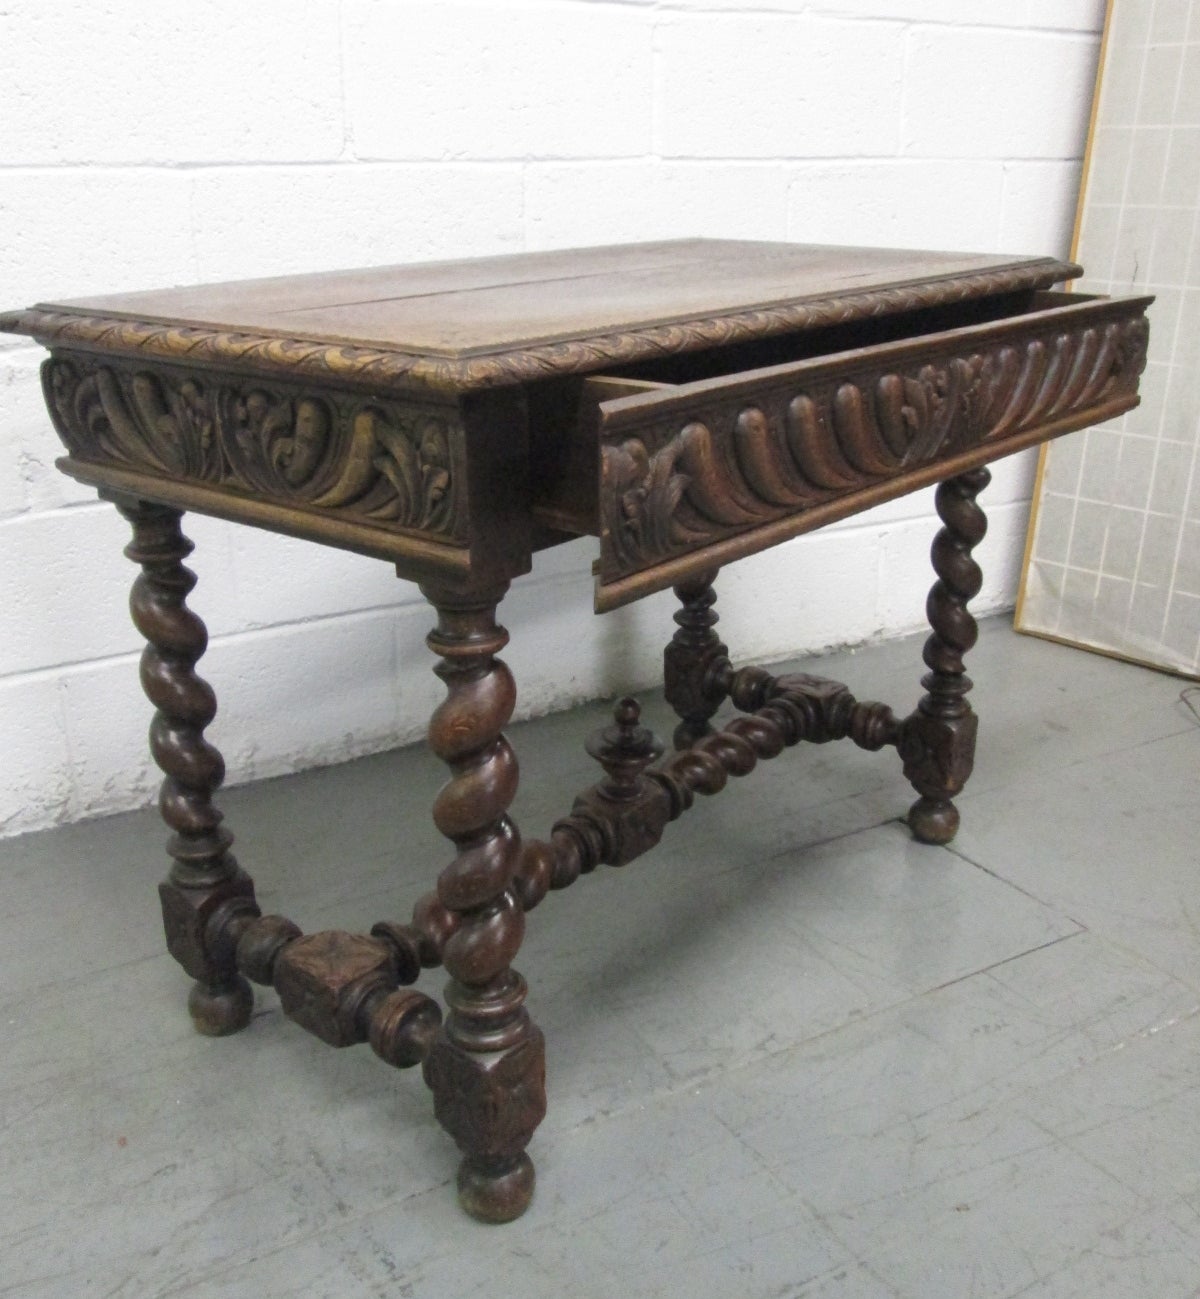 1850s Barley twist table. Has a single pull-out drawer and a finial to the center of the stretcher. Can also be used as a desk.